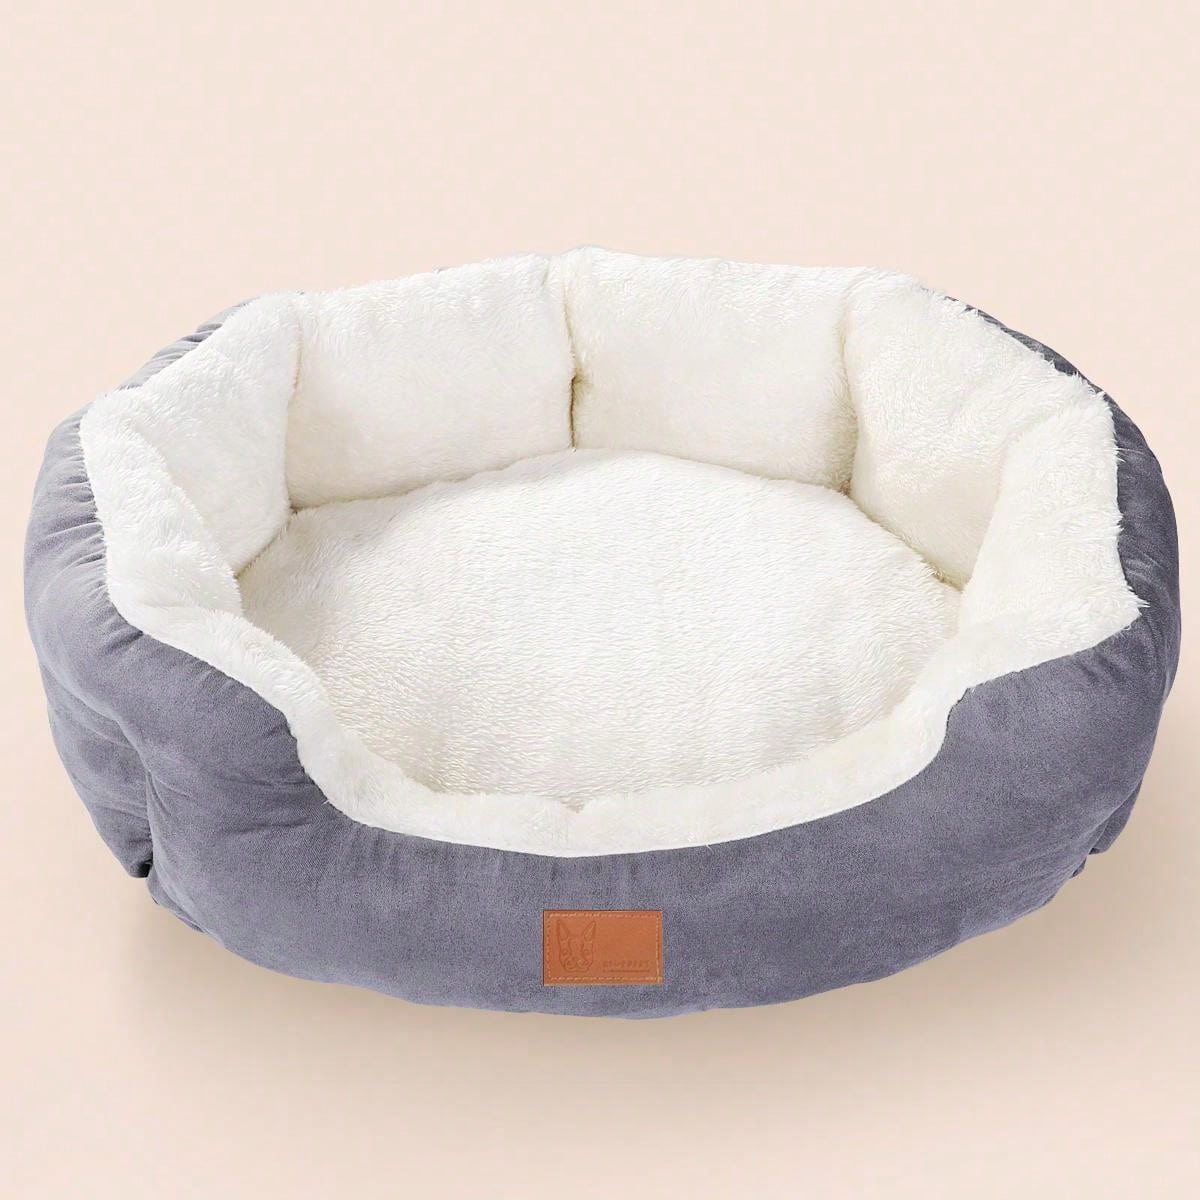 SHEIN Pet Bed For Small And Medium Dogs, Cat Beds For Indoor Cats, Pet Bed For Puppy And Kitty, Extra Soft With Non-Slip Bottom Grey L,M,S